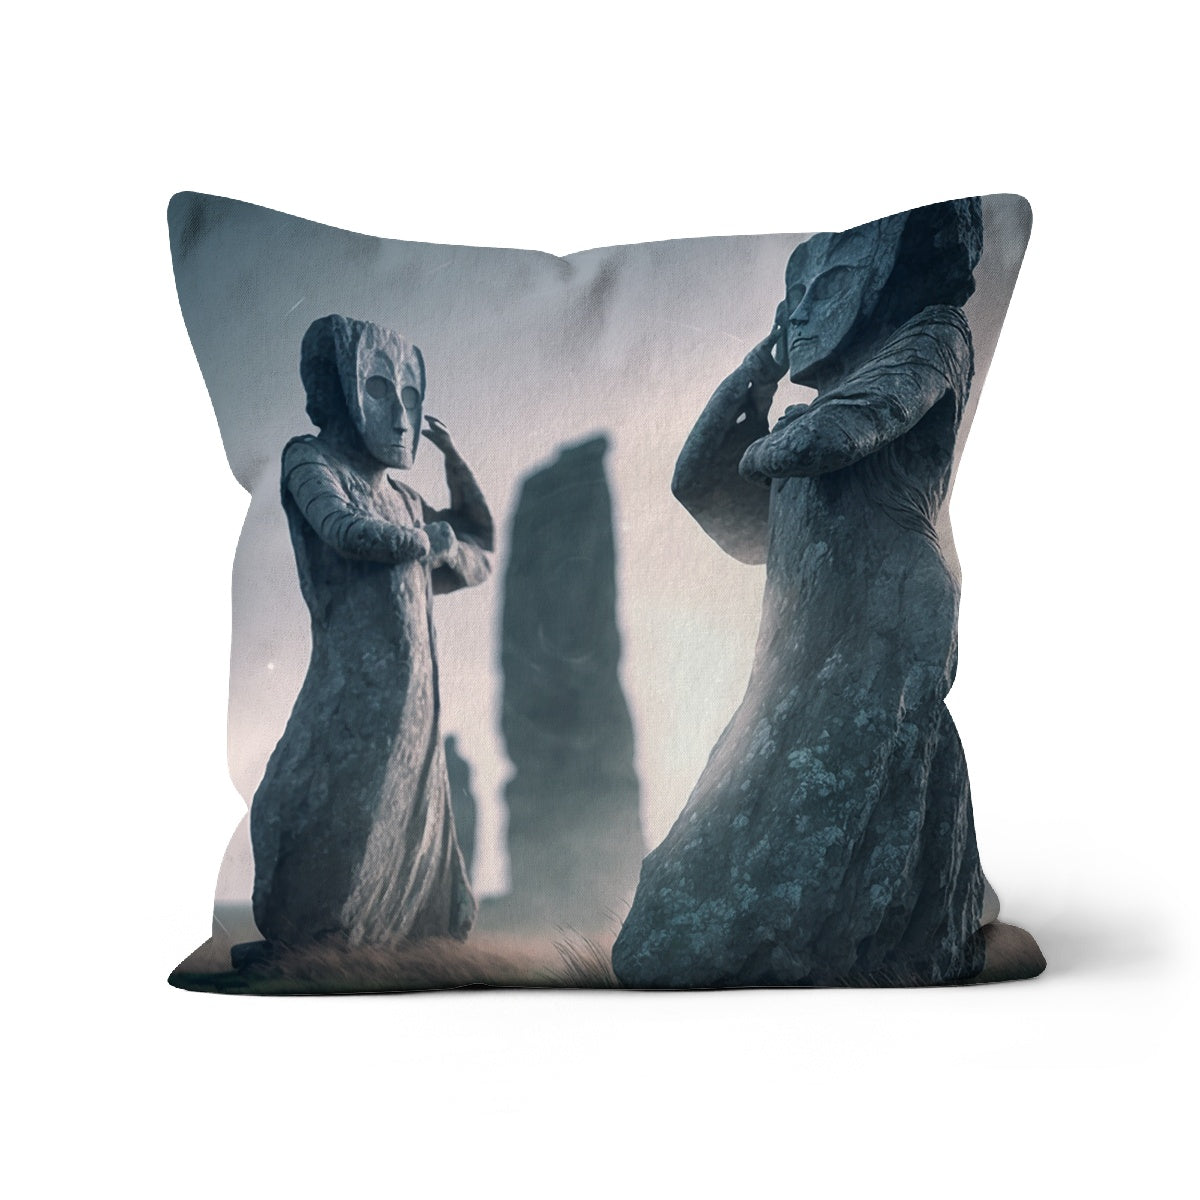 The thinkers Cushion